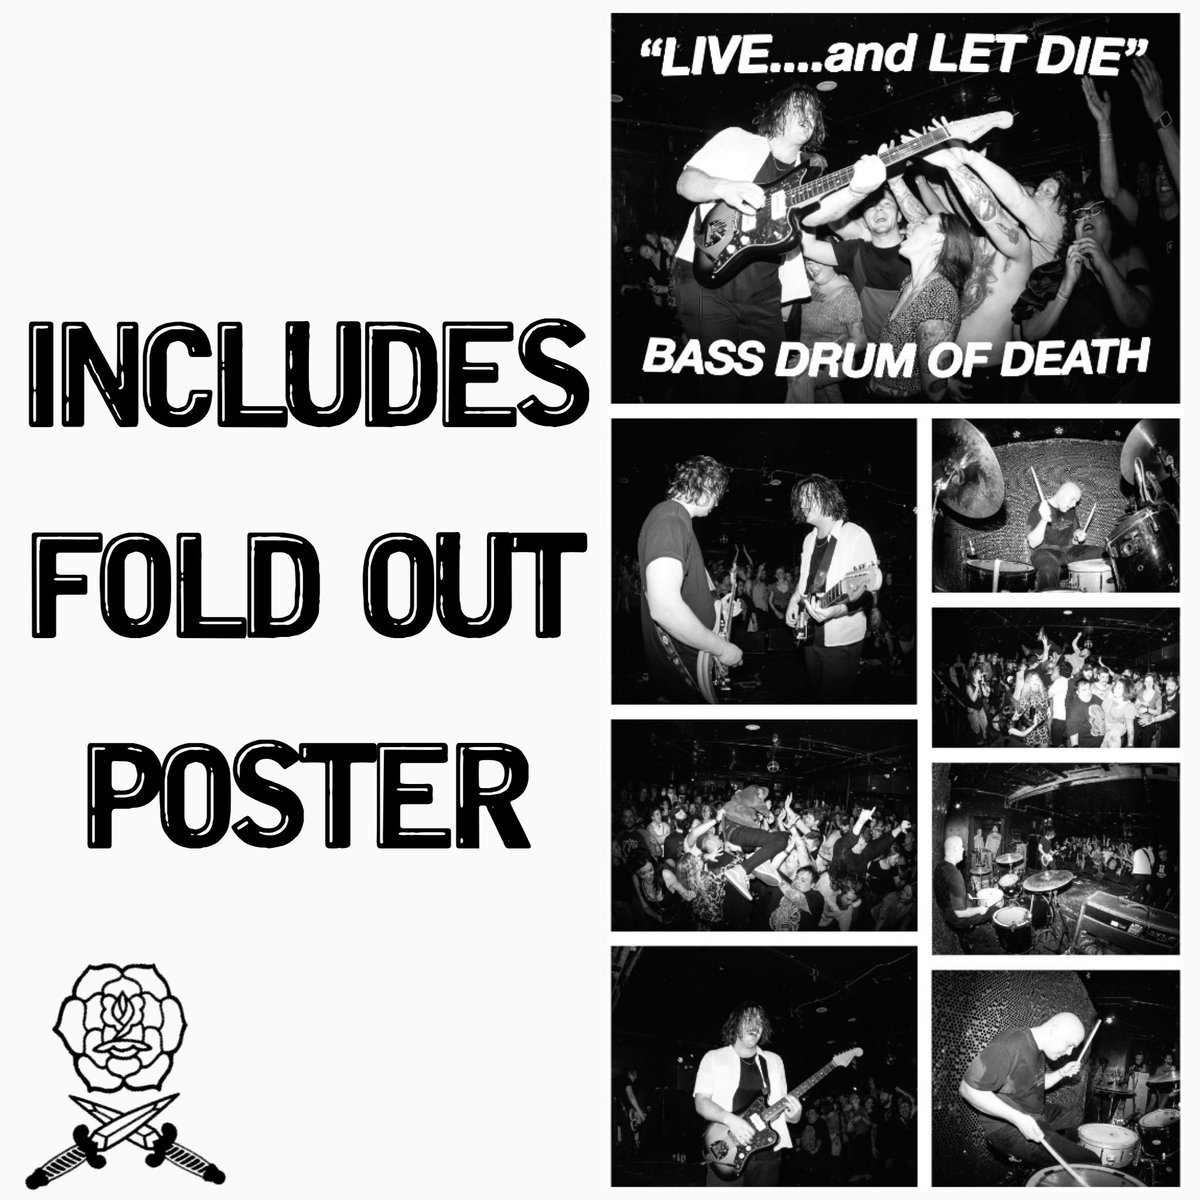 “LIVE….and LET DIE” 14 SONGS 1 LIVE RECORD PHOTOS BY LARRY NIEHUES AND BROCK FETCH FOLD OUT POSTER OUT EVERYWHERE JUNE 7 2024 LINK IN BIO TO PREORDER